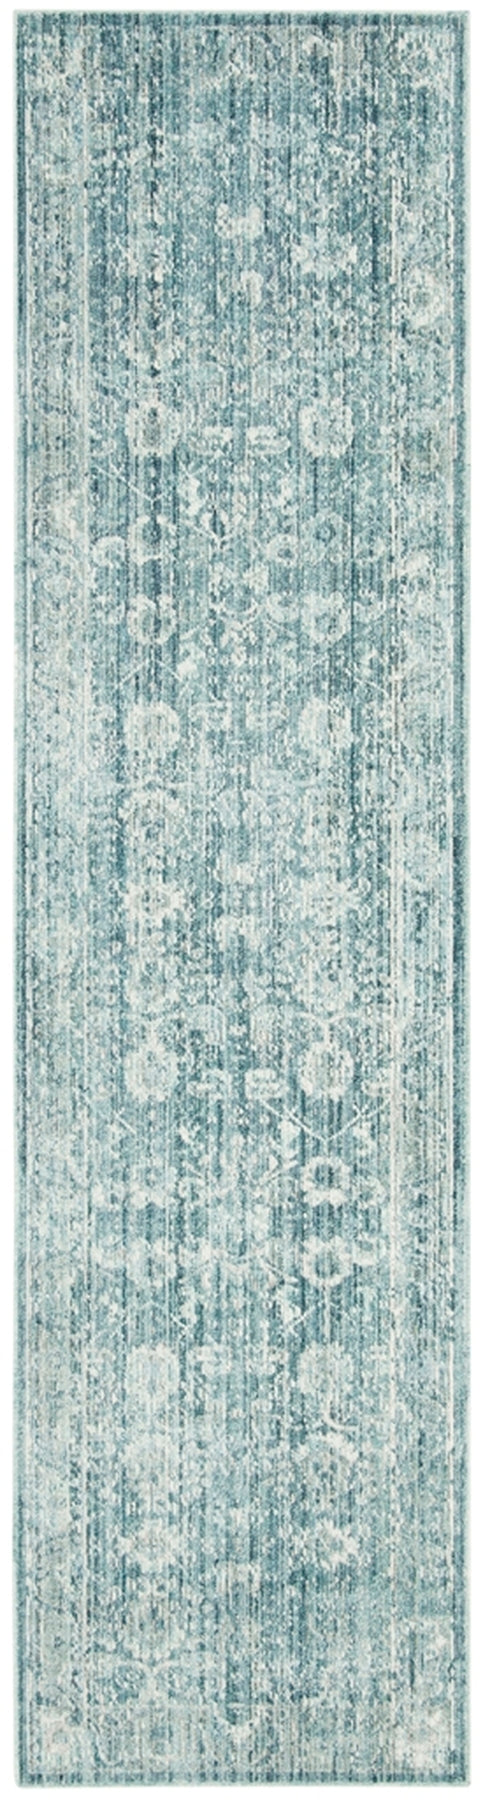 Safavieh Illusion Power Loomed Cotton Backing Rugs In Blue / Ivory